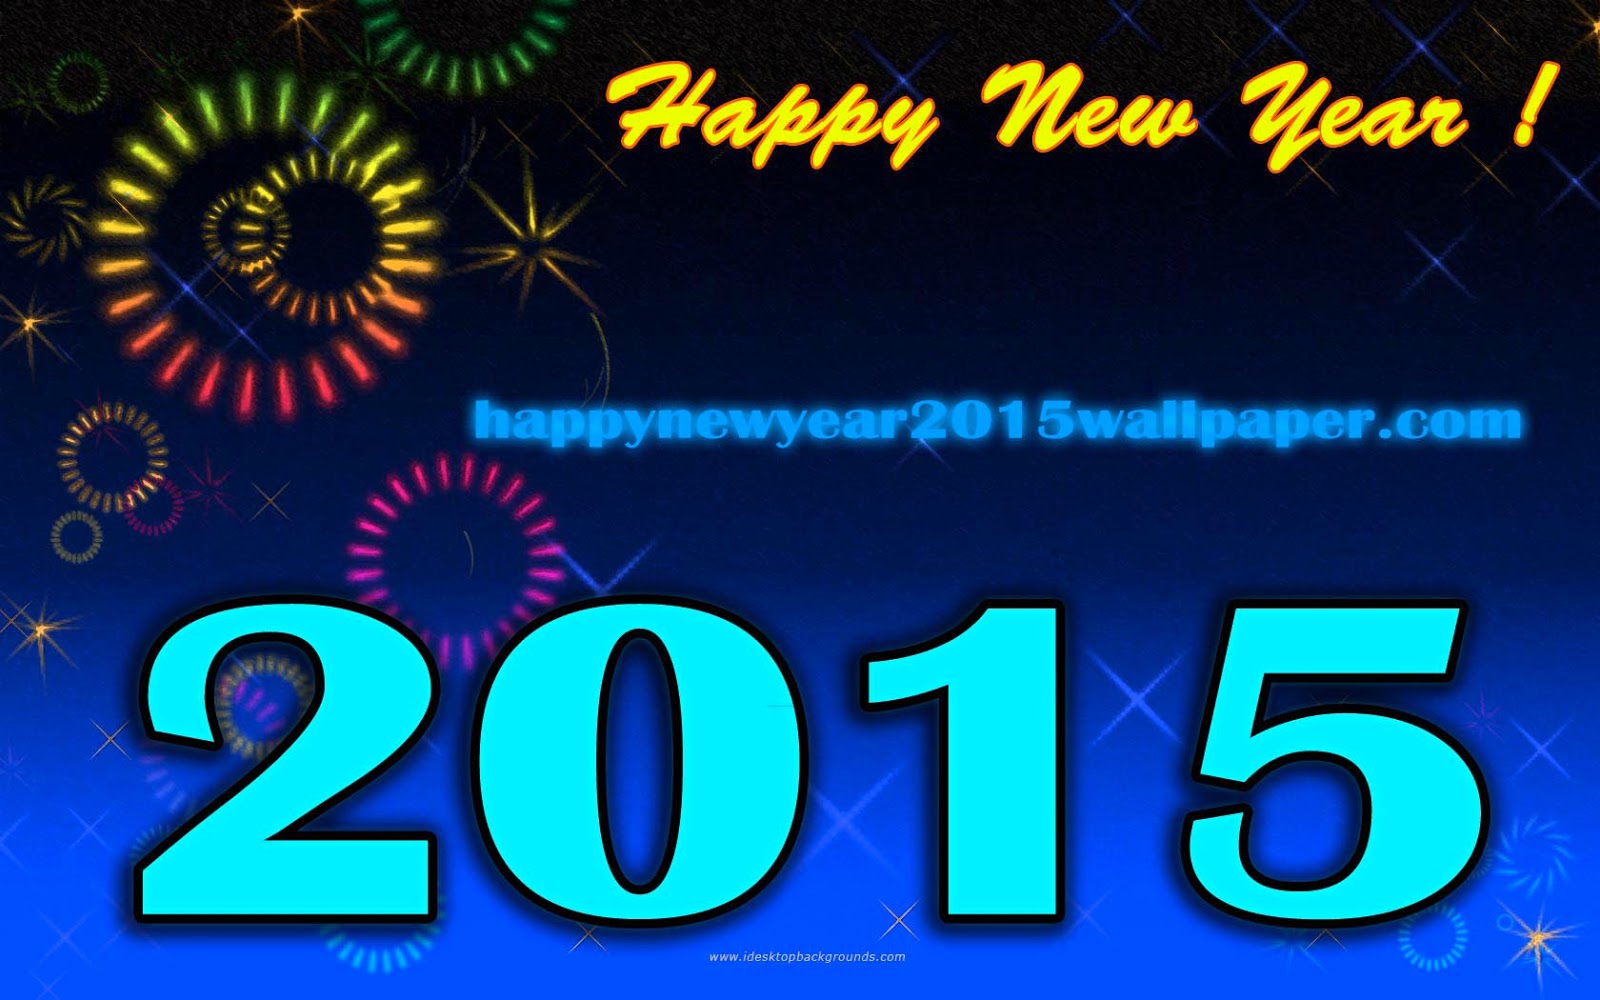 Happy New Year Wallpaper For Greetings Use These